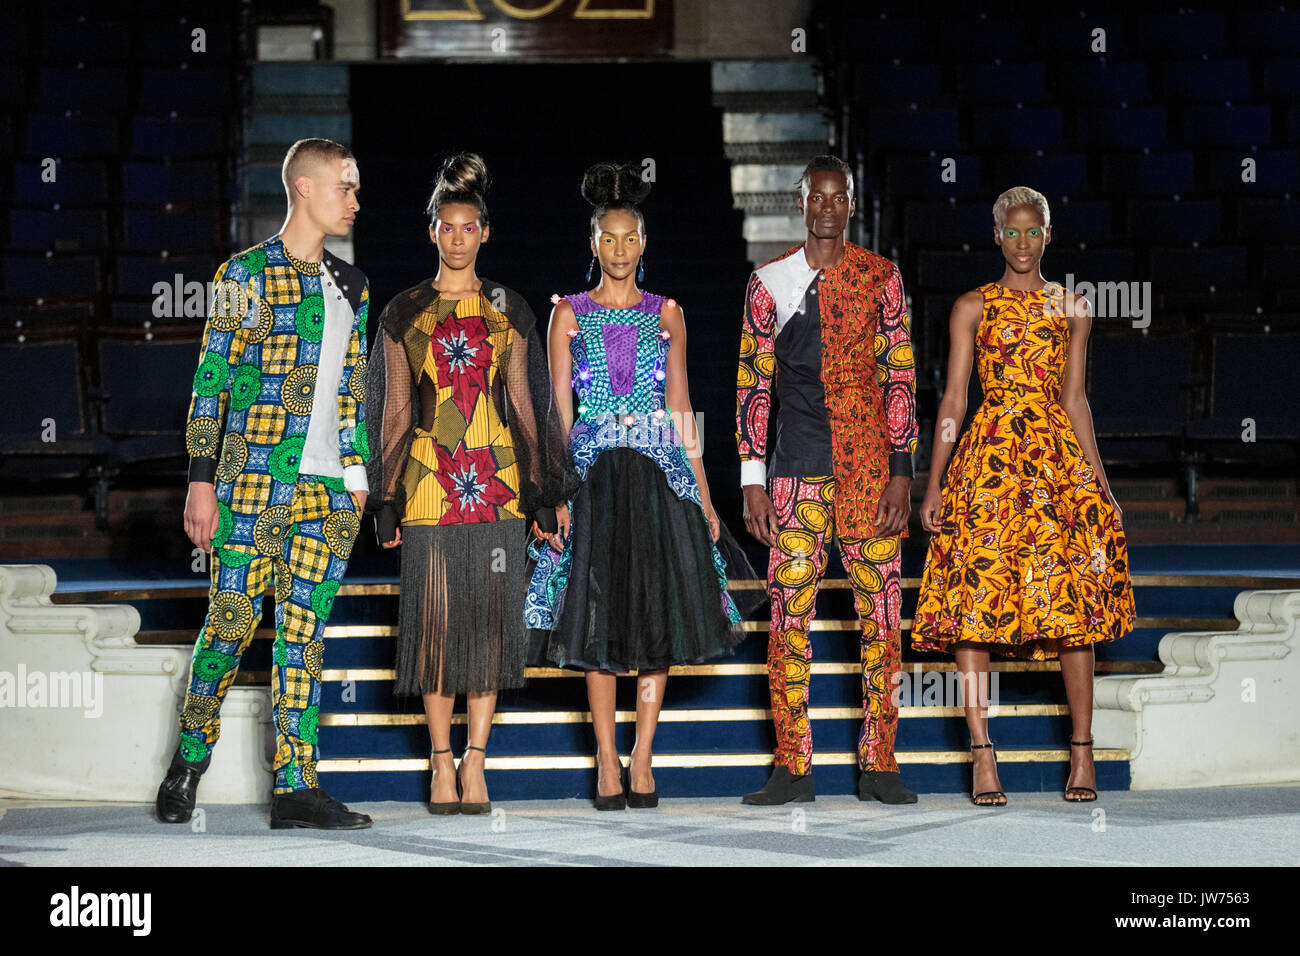 London, UK, 11th August 2017. The House of Regallia  designs are being presented. Models on the second runway of the day, with designs by Godwin Green, Araewa, Bijelly, Regallia, Maufechi, Monami 4 Moremi, Kola Kuddus. Since debuting in 2011, the two day Africa Fashion Week London, AFWL, has grown into one of the largest Africa inspired fashion events in Europe. Stock Photo